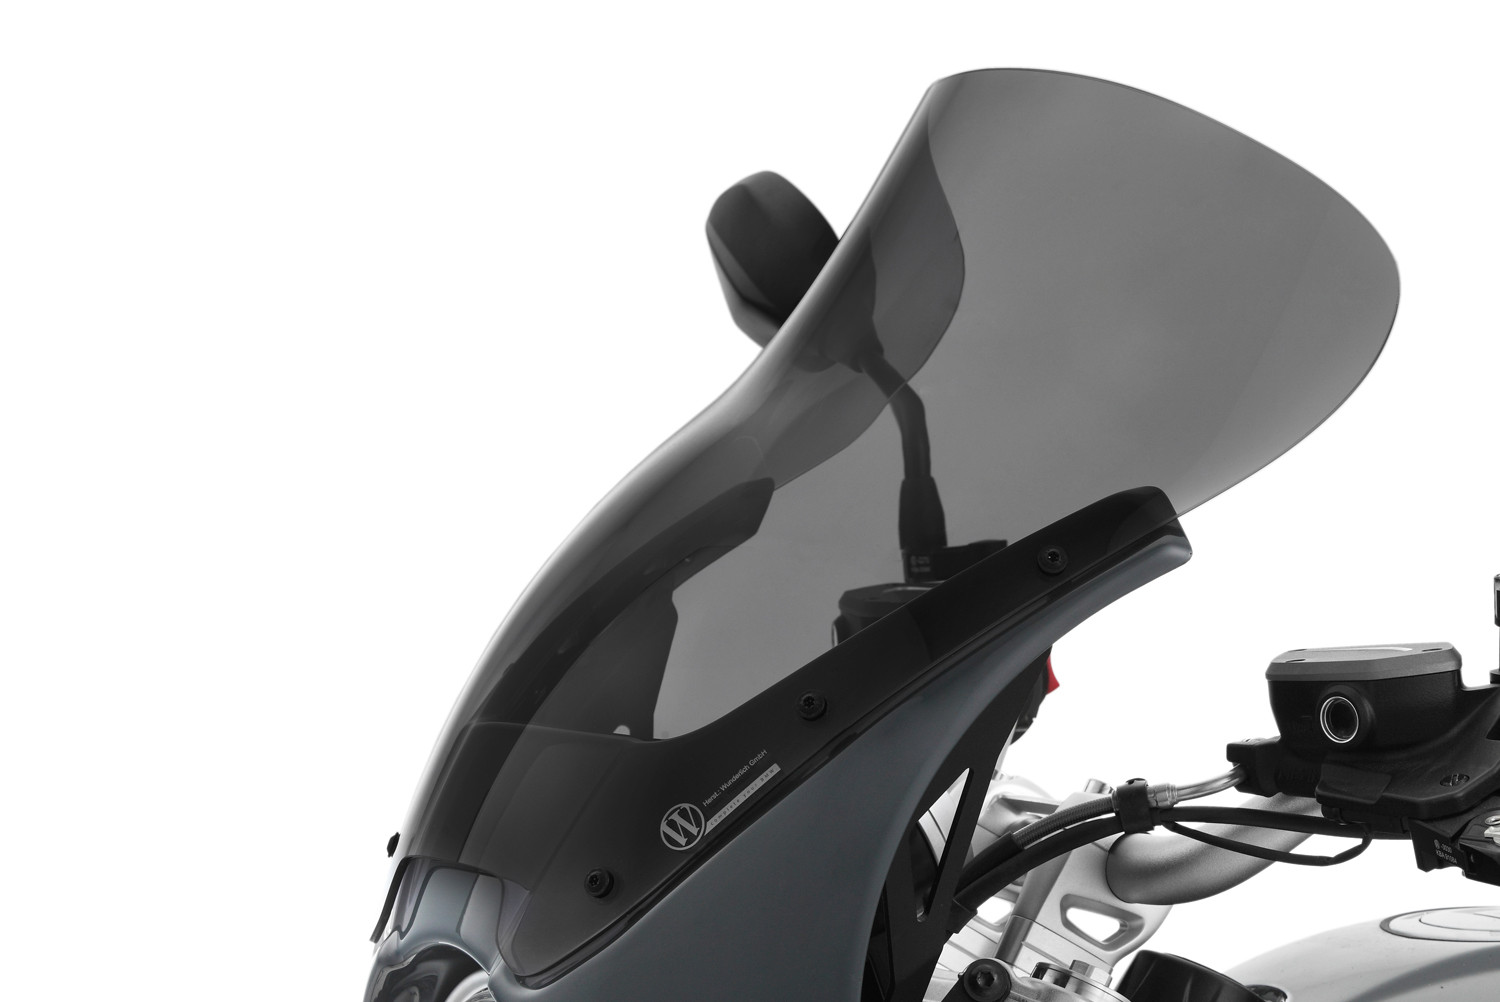 Windshield for motorcycle fairing